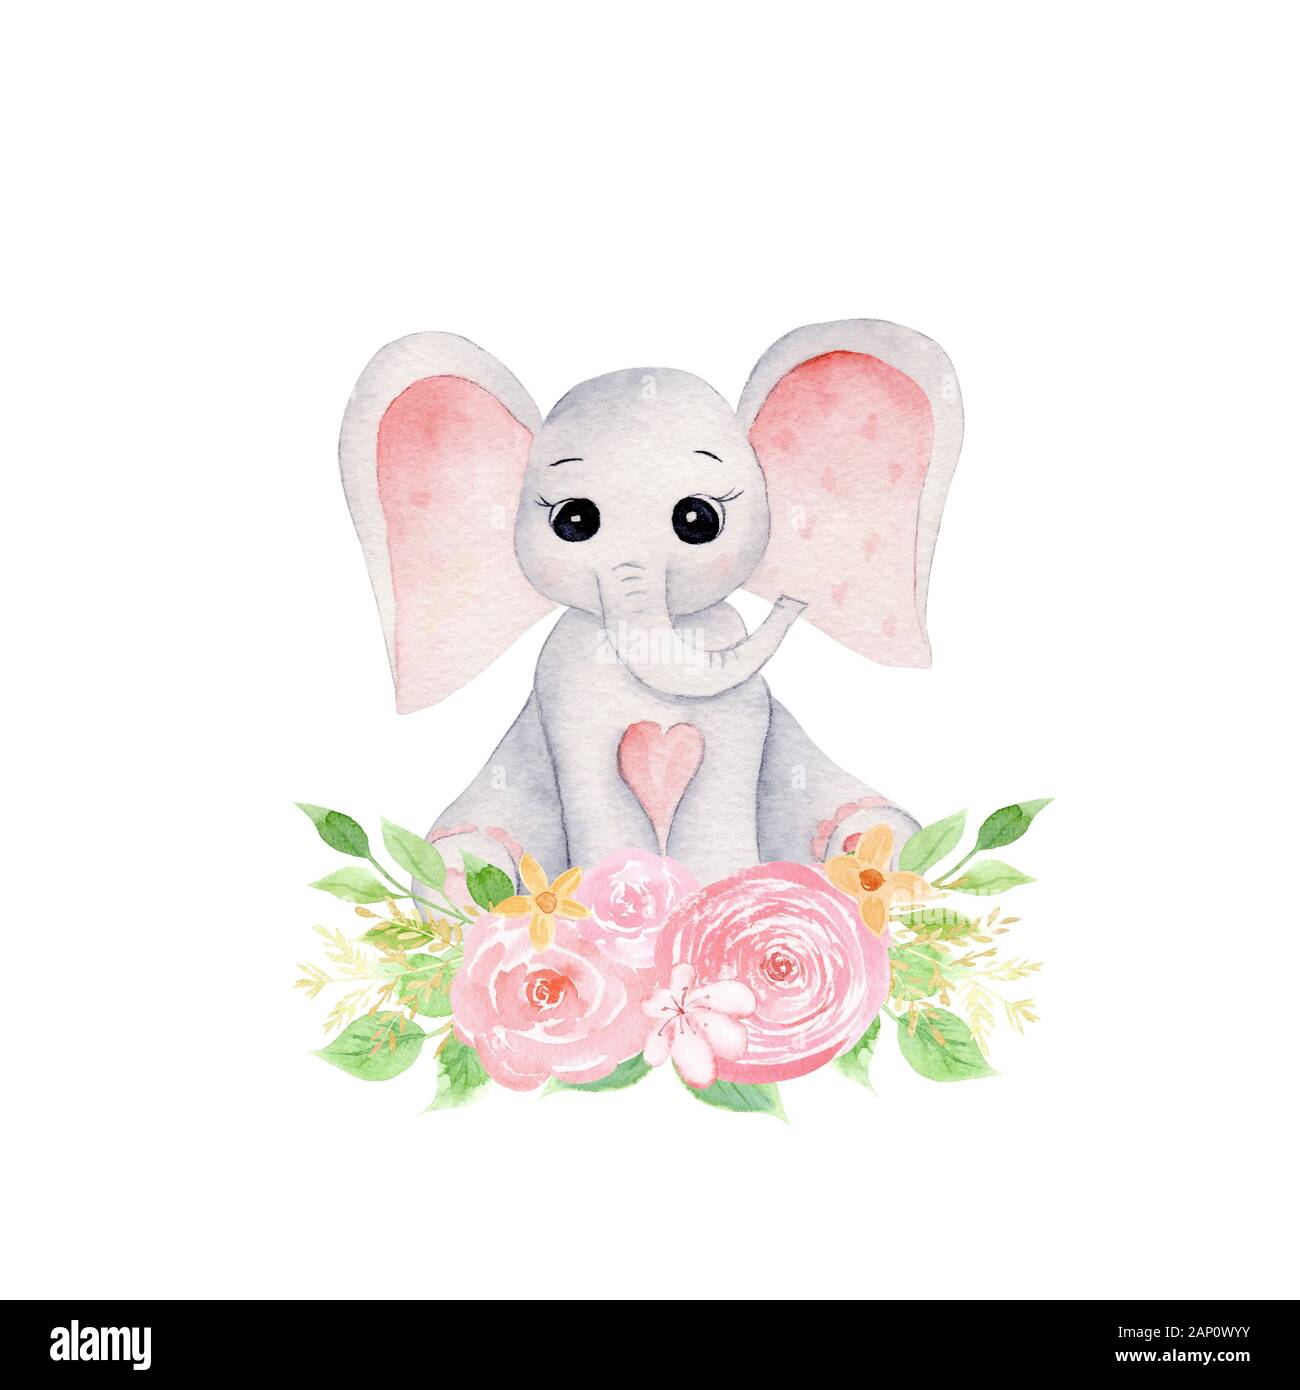 Baby elephant with pink flowers and green foliage hand drawn raster illustration. Cute animal girl and bouquet isolated watercolor composition. Aquare Stock Photo